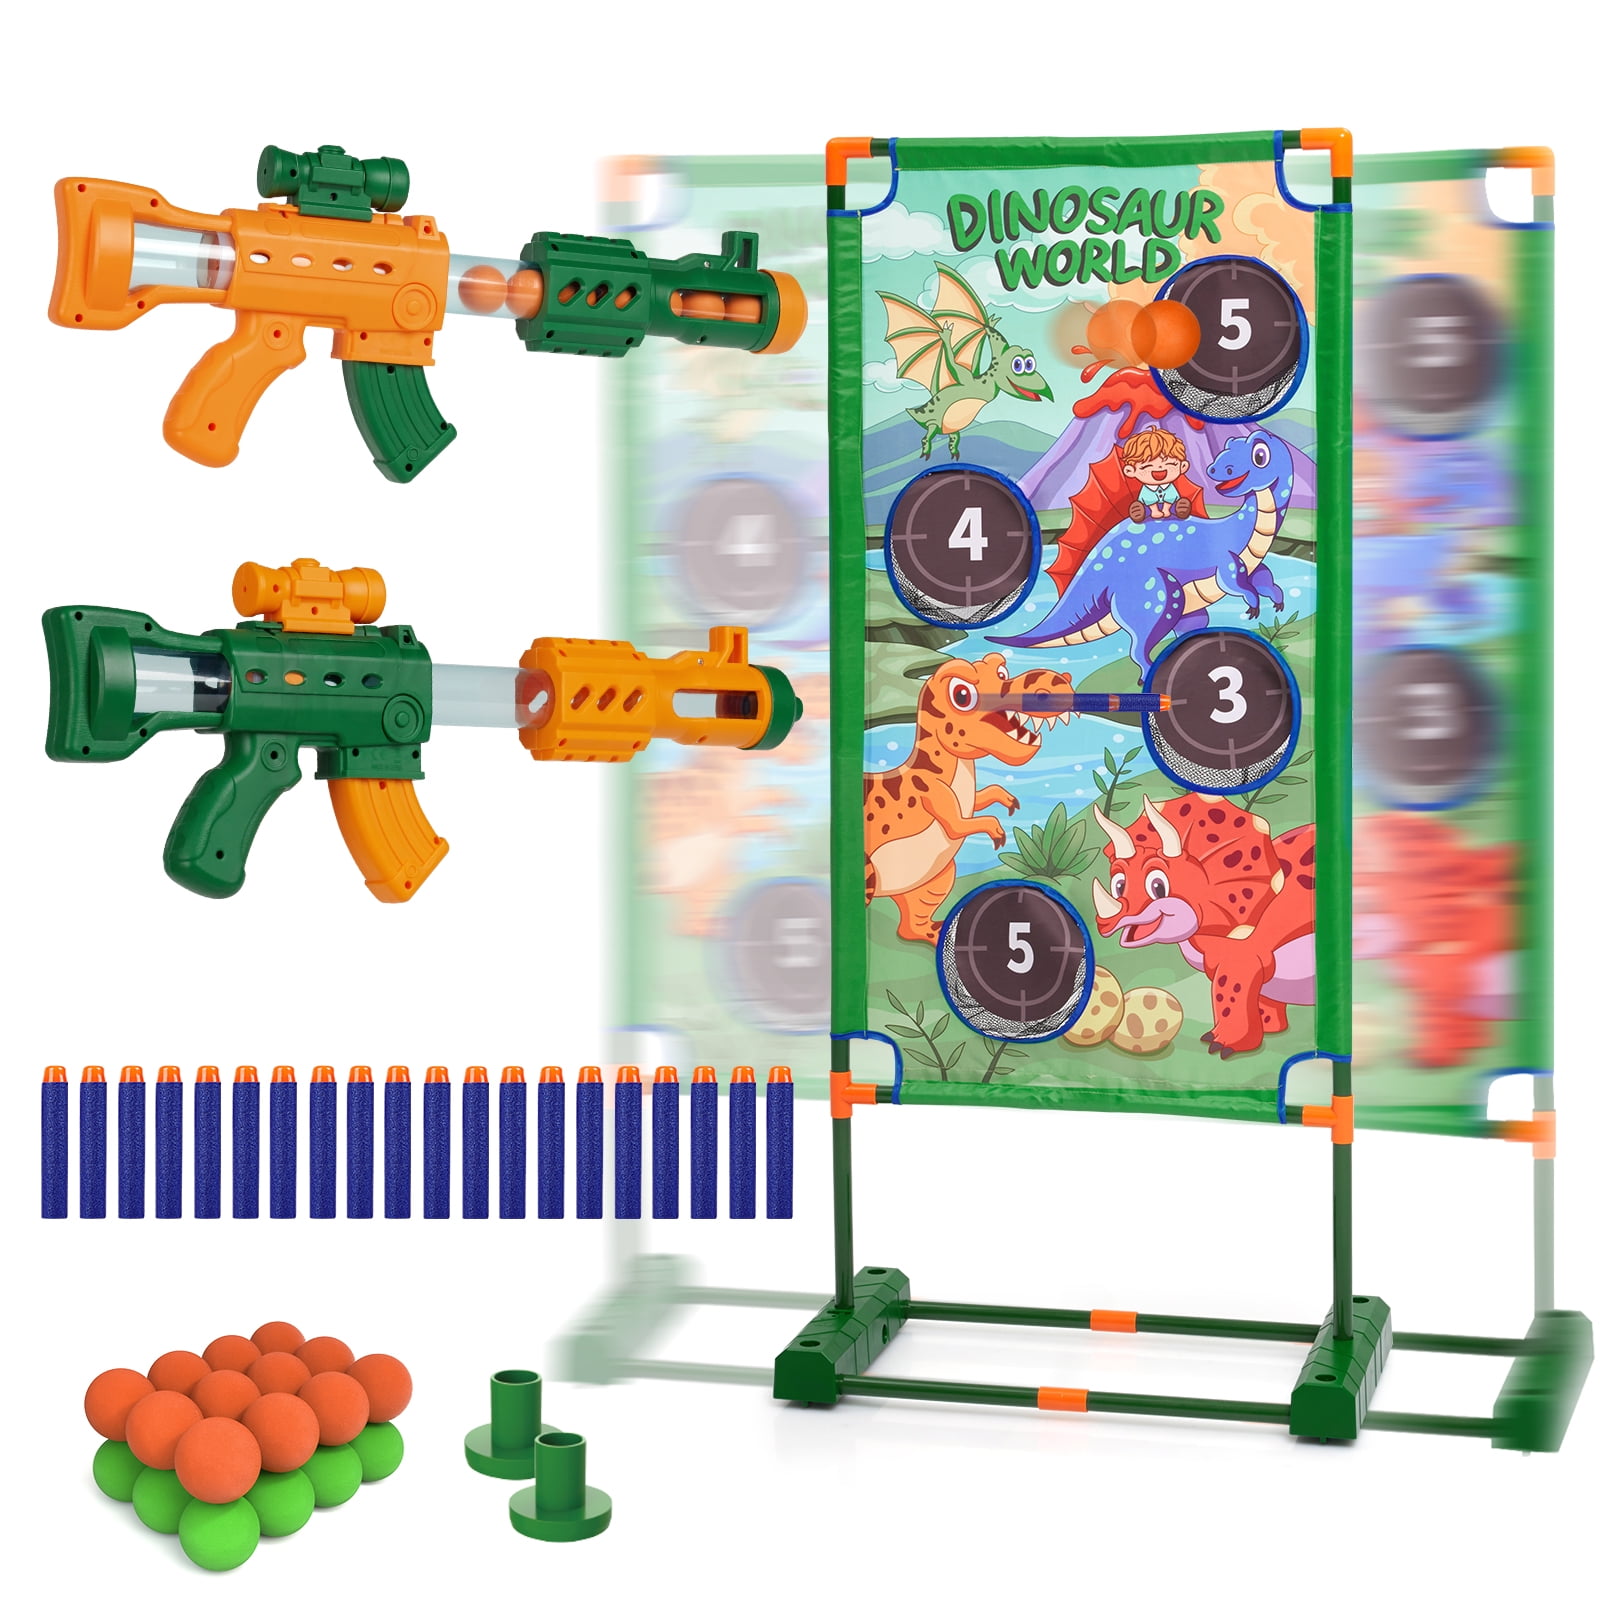 Dinosaur Shooting Games for Kids, Moving Target Game Toys for 5 6 7 8 9 10 Year Old Boys, 2PK Toy Gun with Foam Bullets Indoor Activities for Kids Ages 6-8, Christmas Birthday Gifts for Boys 5+